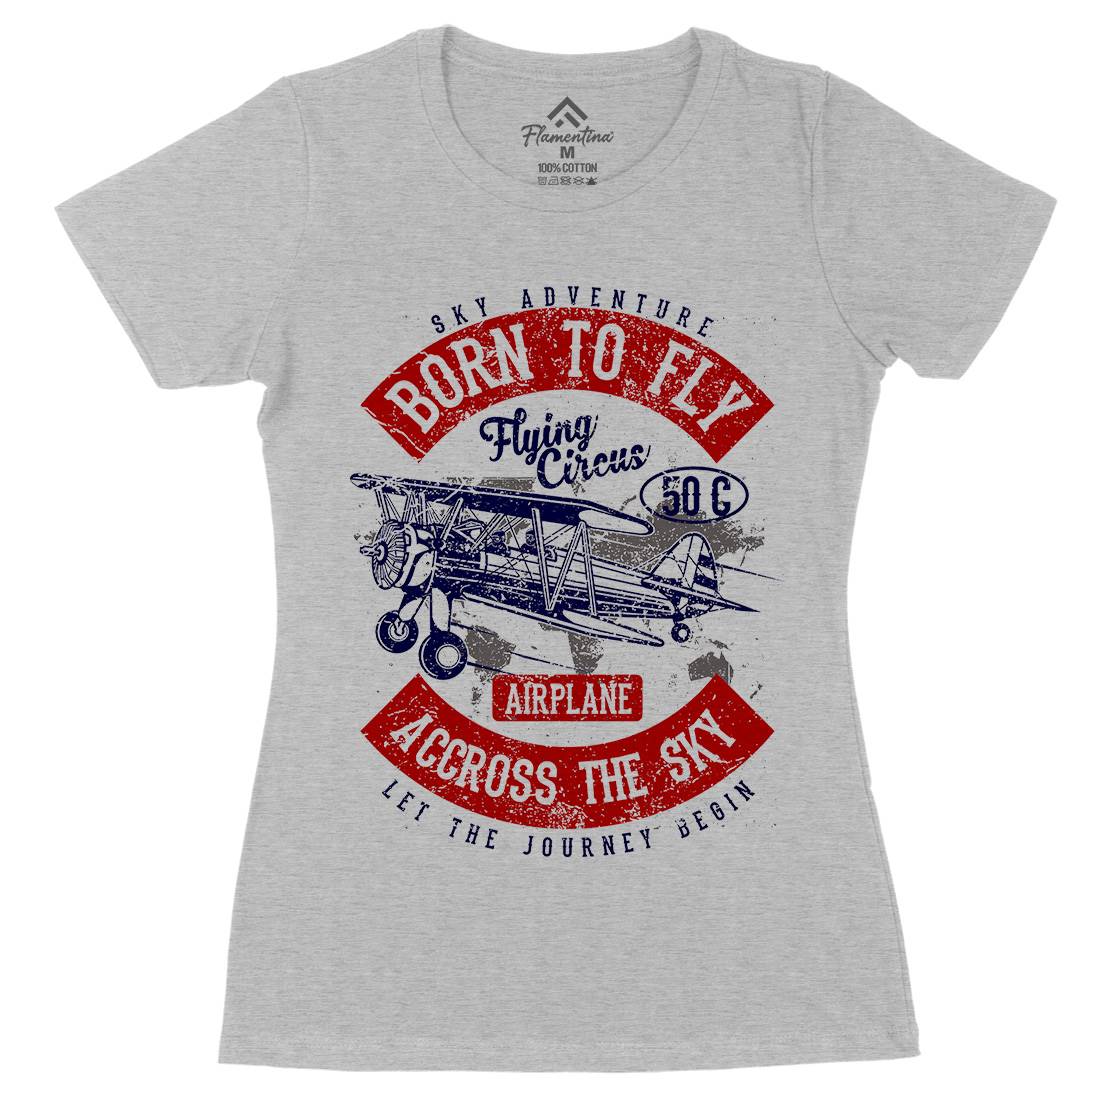 Born To Fly Womens Organic Crew Neck T-Shirt Vehicles A019